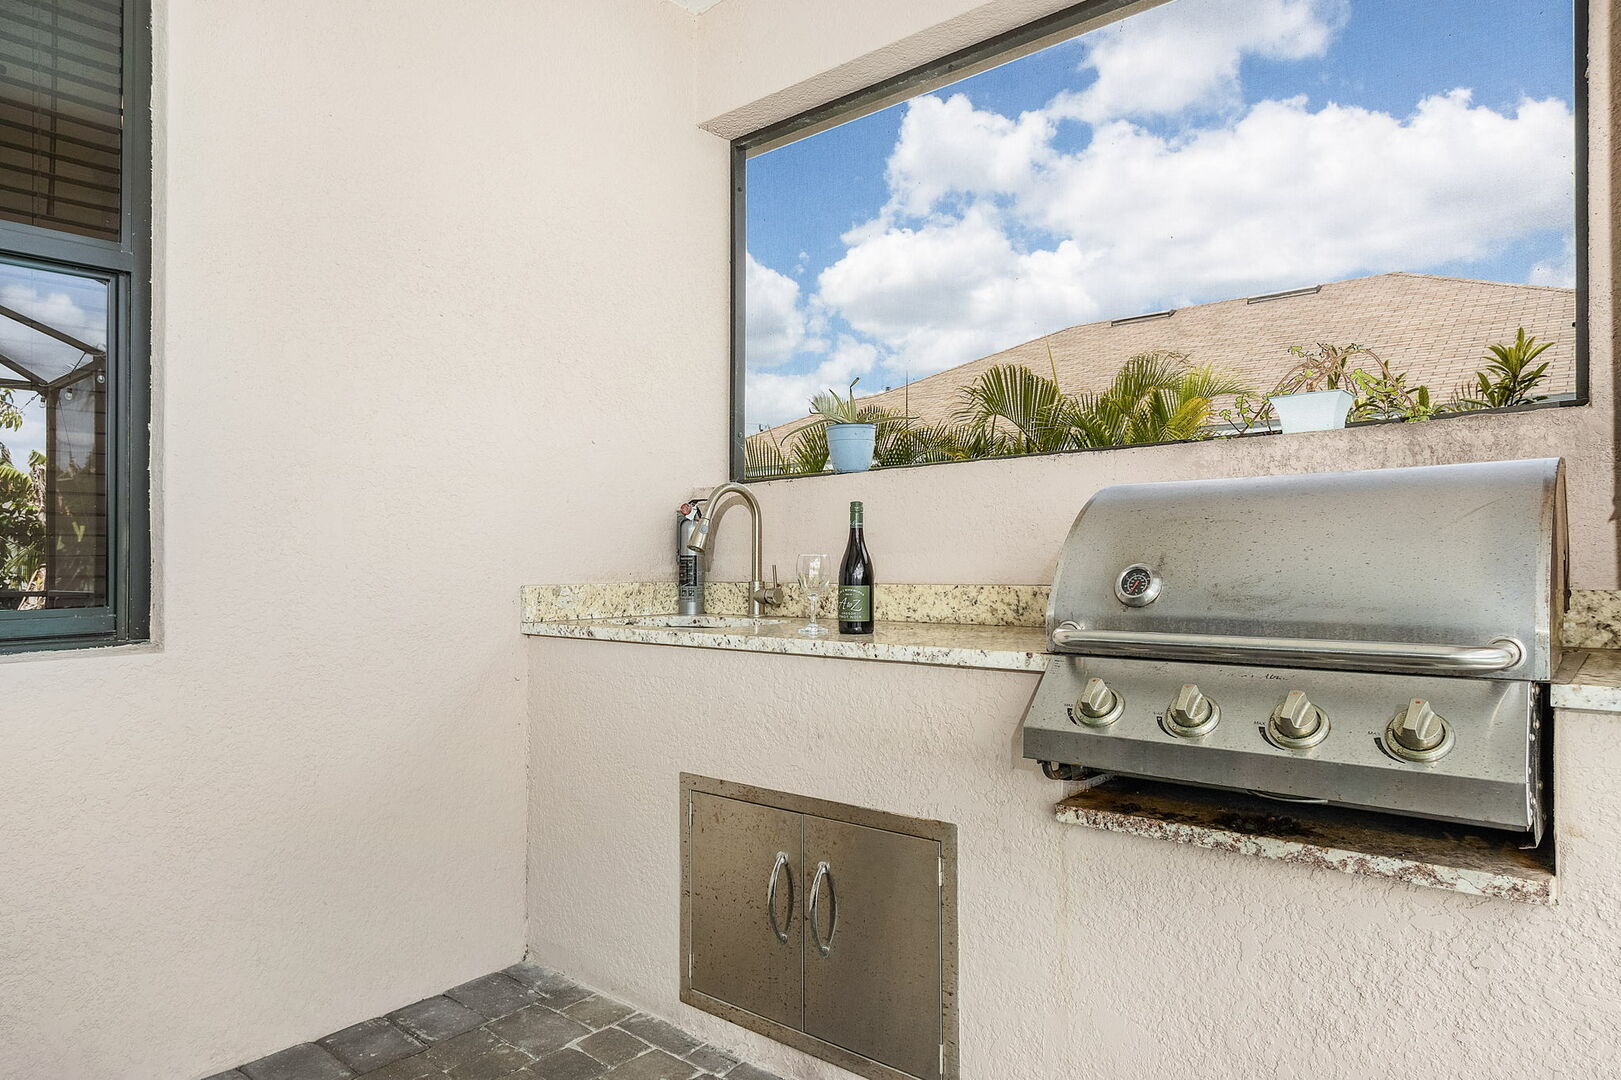 Outdoor kitchen at Vacation Rental in Cape Coral, Florida